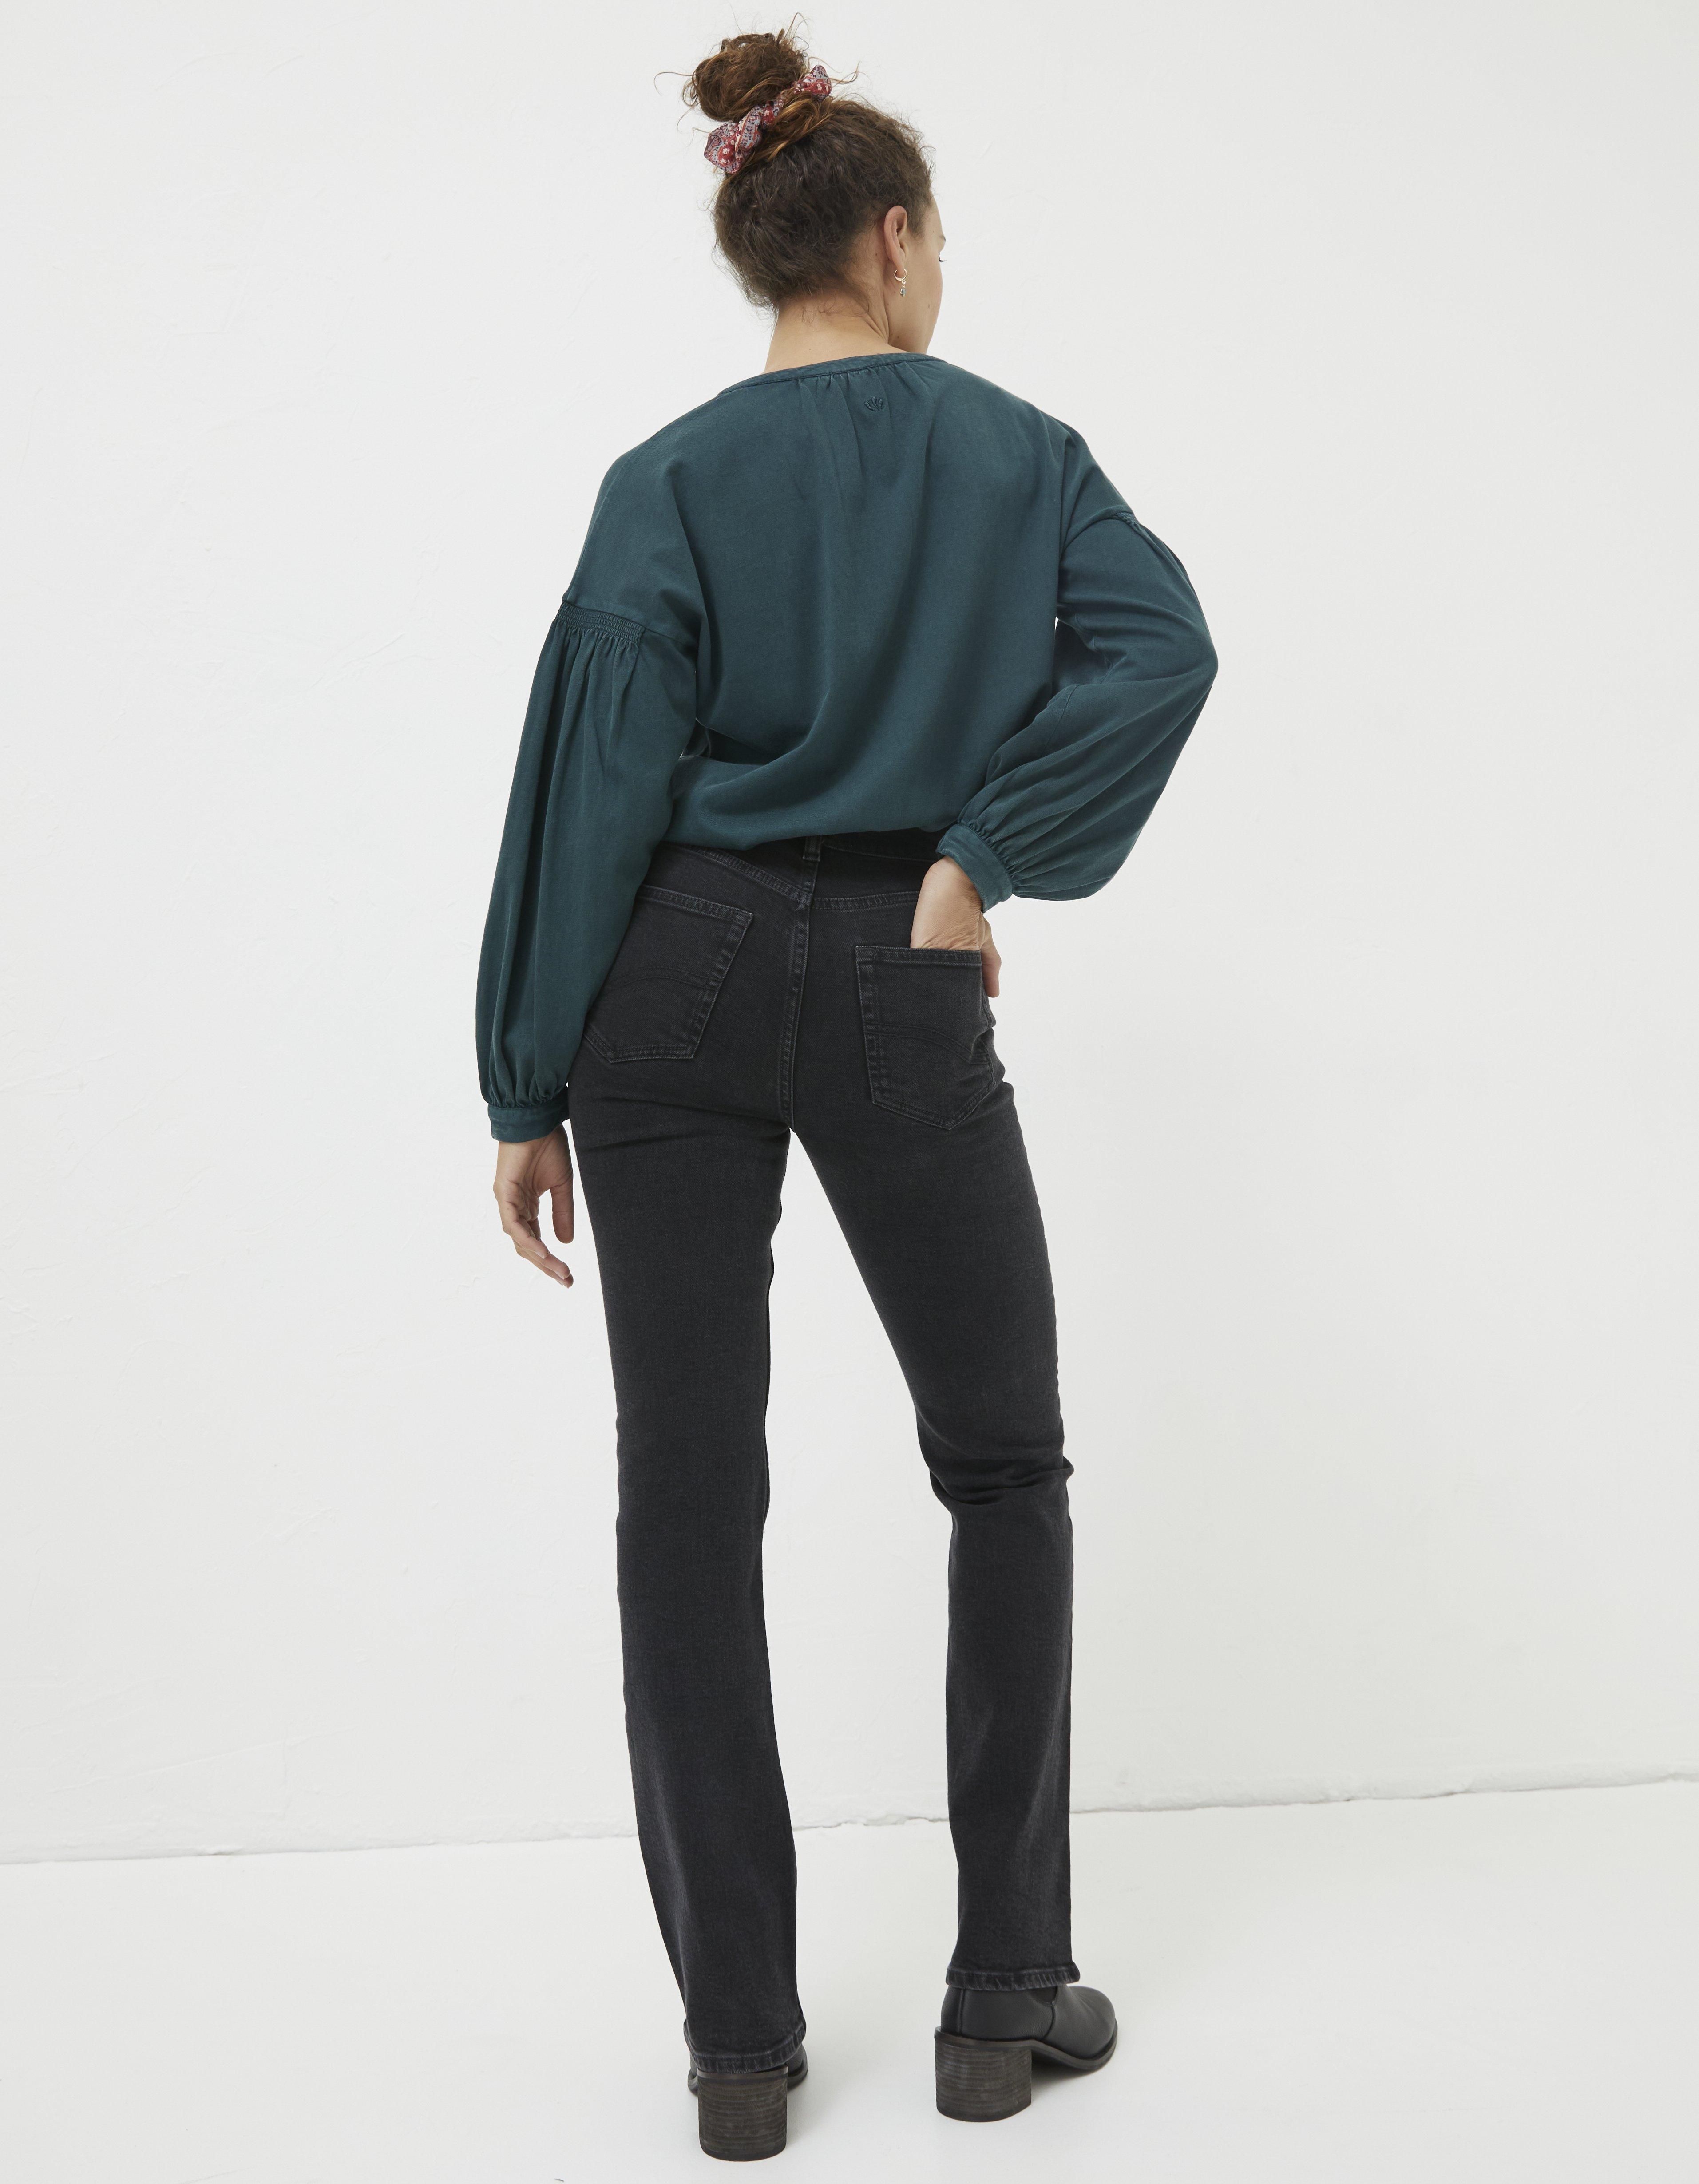 AUTH Brand New Zara High Waisted trouser Mid Green, Women's Fashion,  Bottoms, Other Bottoms on Carousell